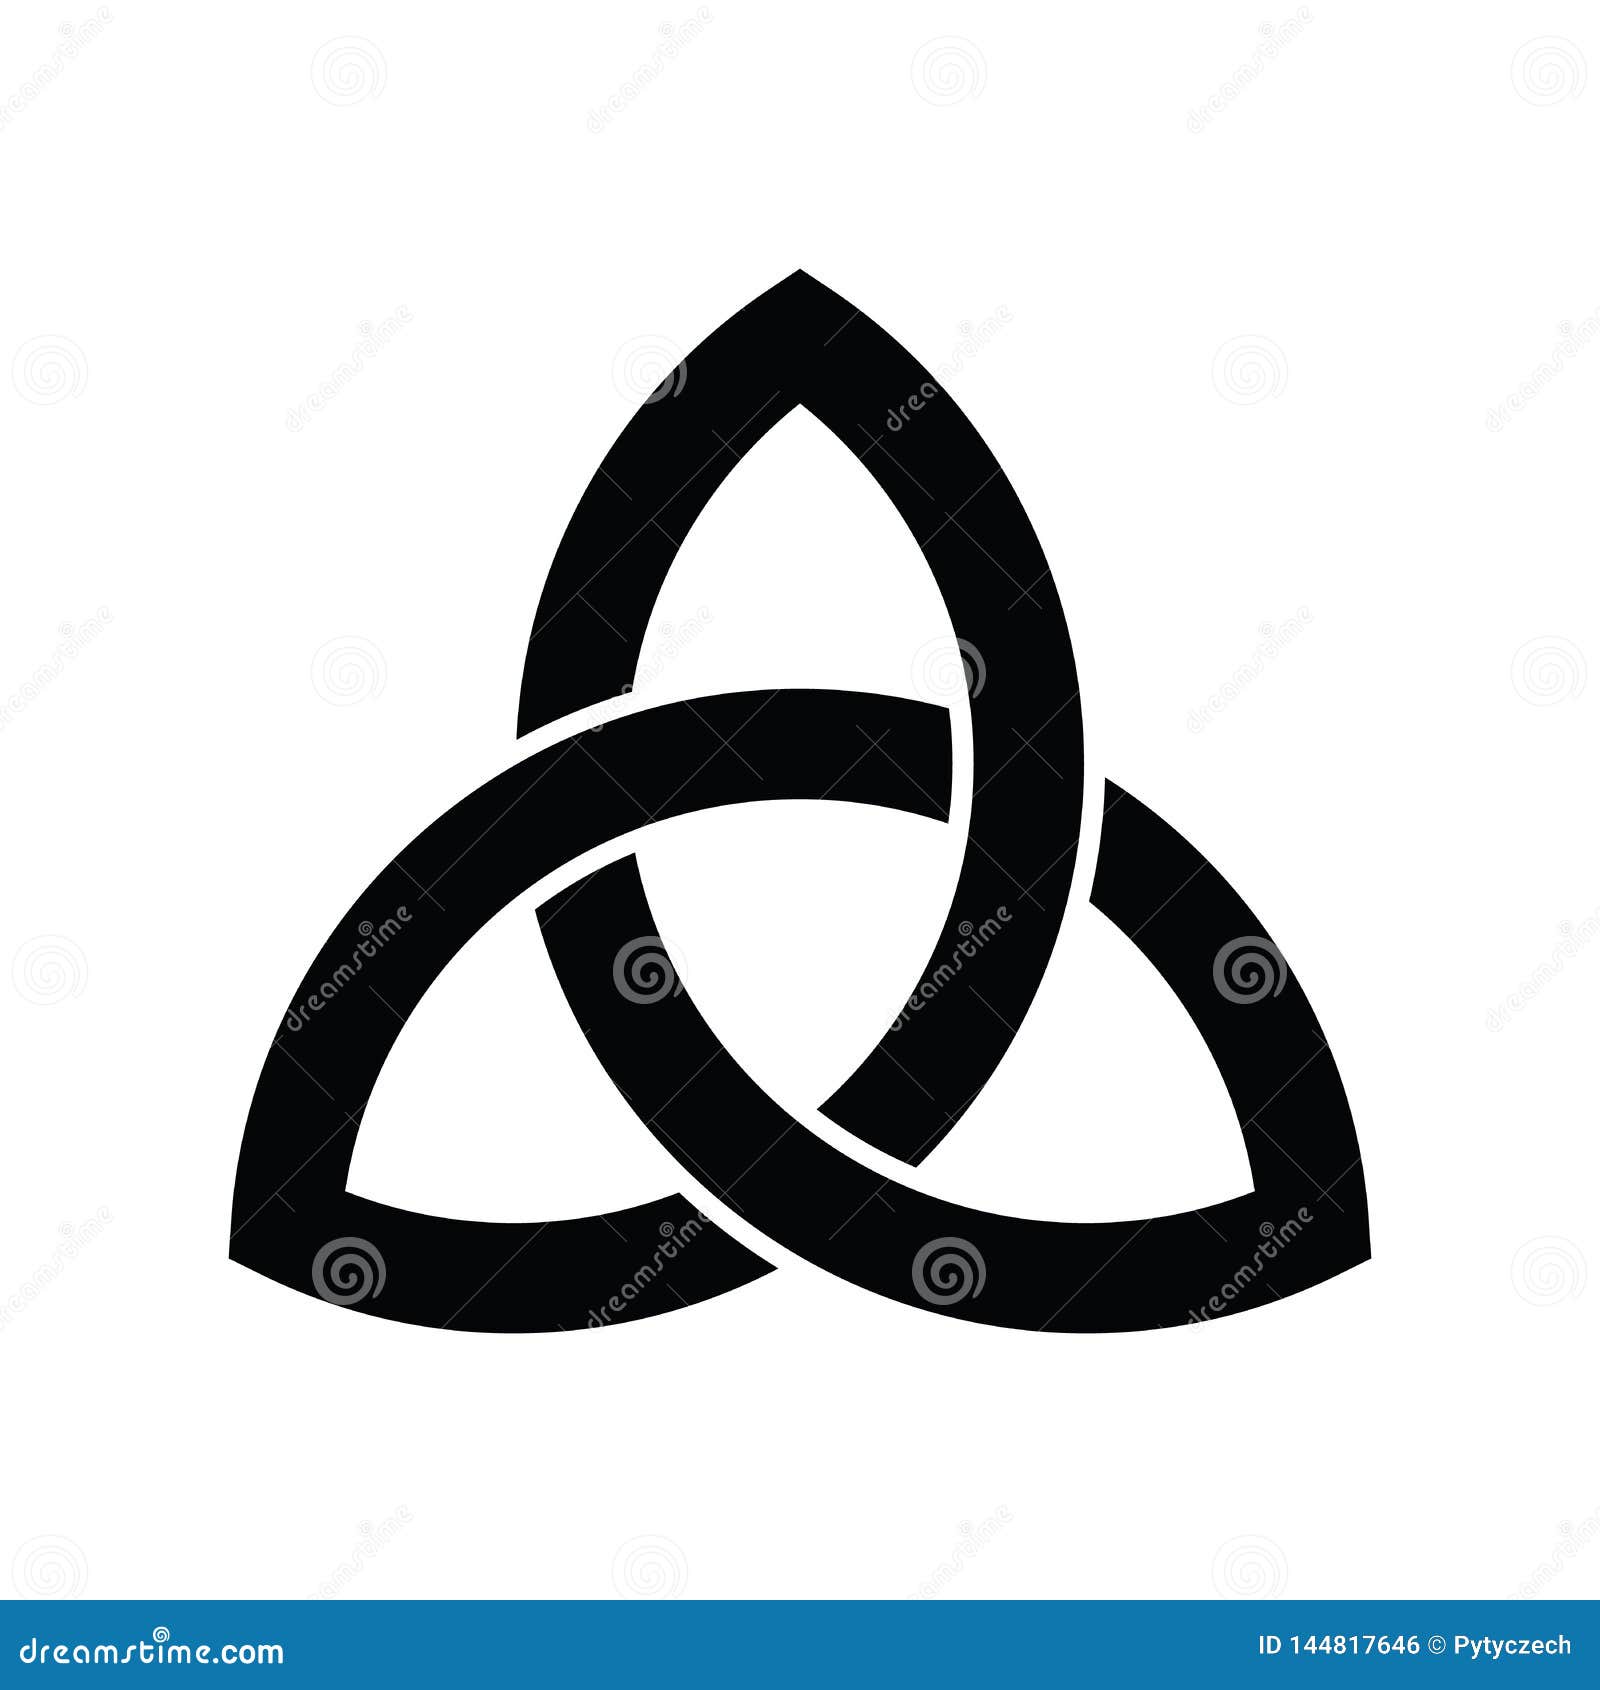 triquetra sign icon. leaf-like celtic . trinity or trefoil knot. simple black  